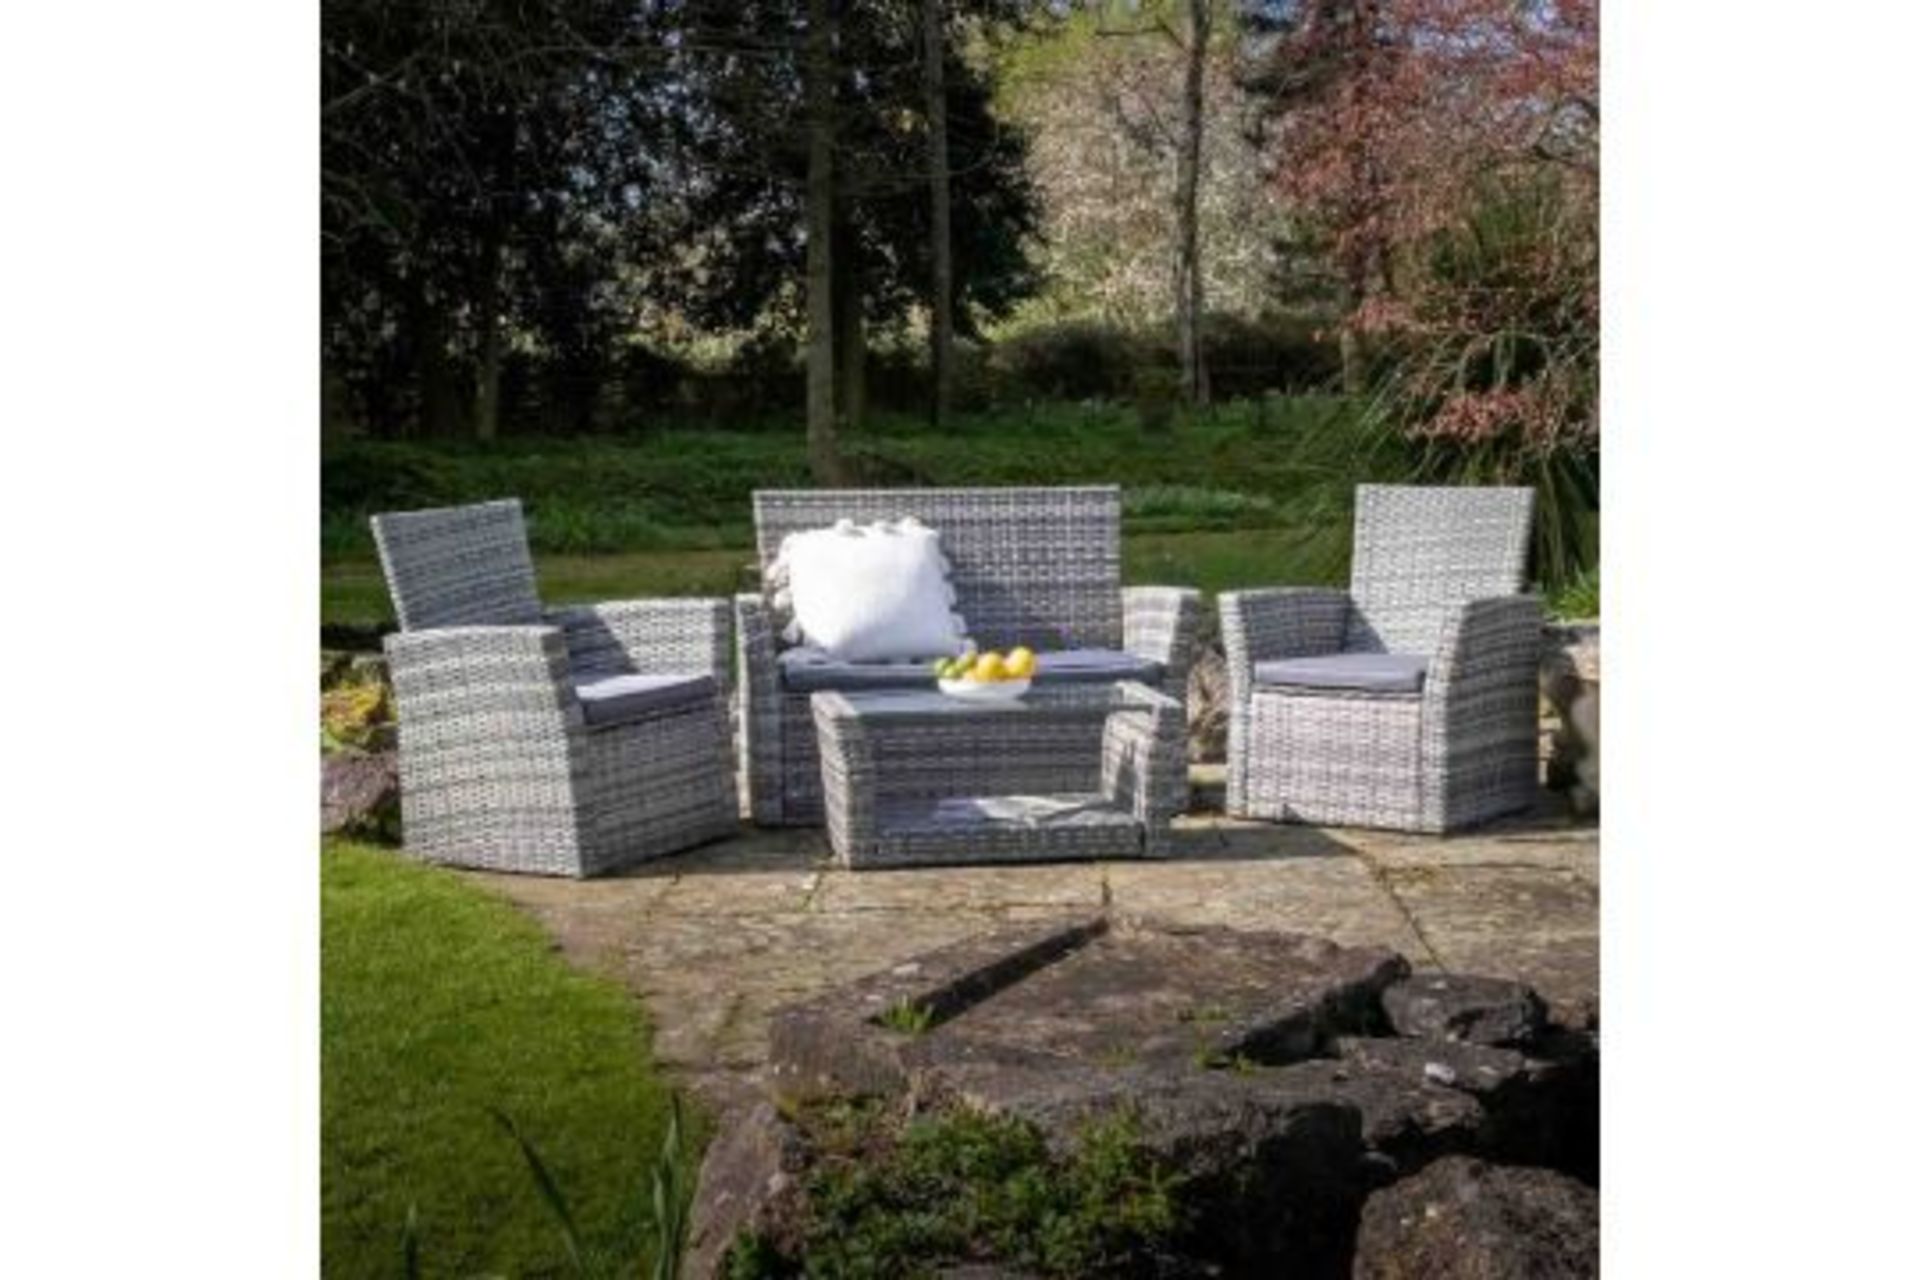 New Boxed Corfo 4 Seater Garden Furniture Set in Grey. The 4-piece garden furniture set includes a - Image 6 of 6